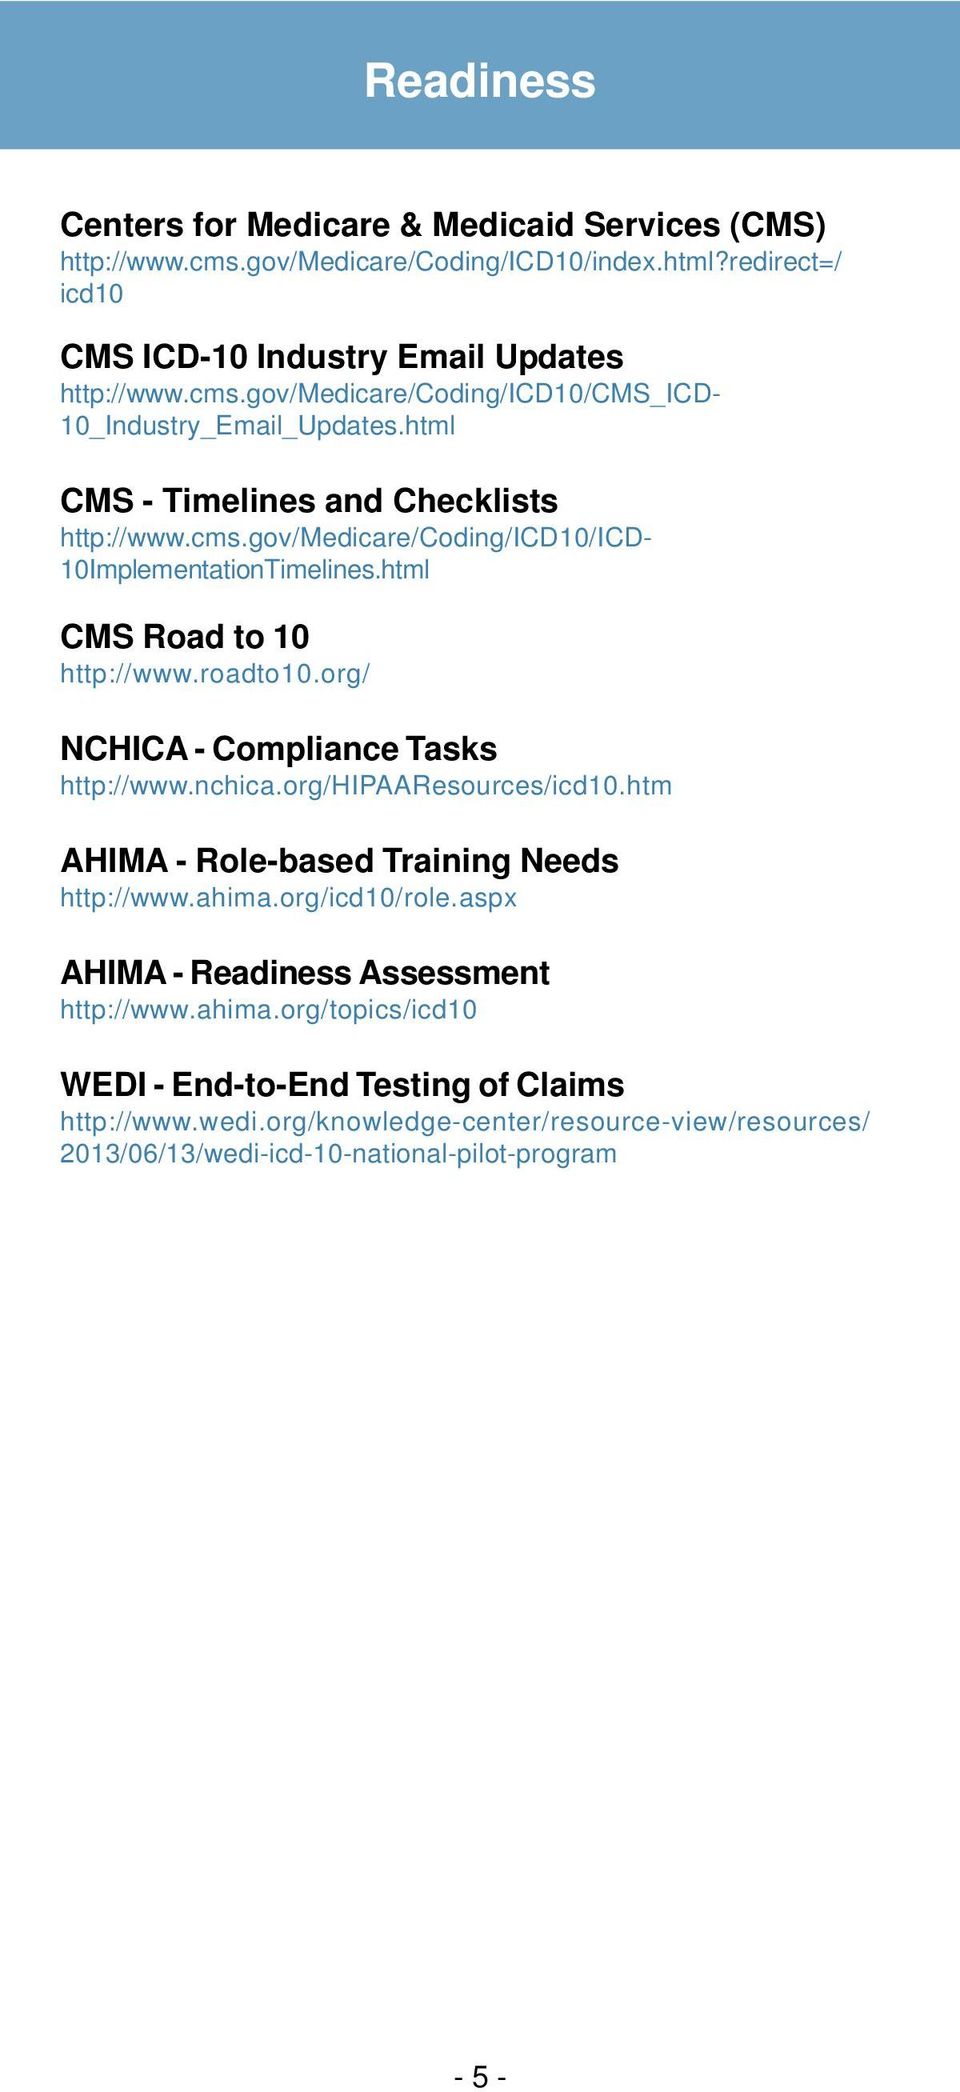 org/ NCHICA - Compliance Tasks http://www.nchica.org/hipaaresources/icd10.htm AHIMA - Role-based Training Needs http://www.ahima.org/icd10/role.